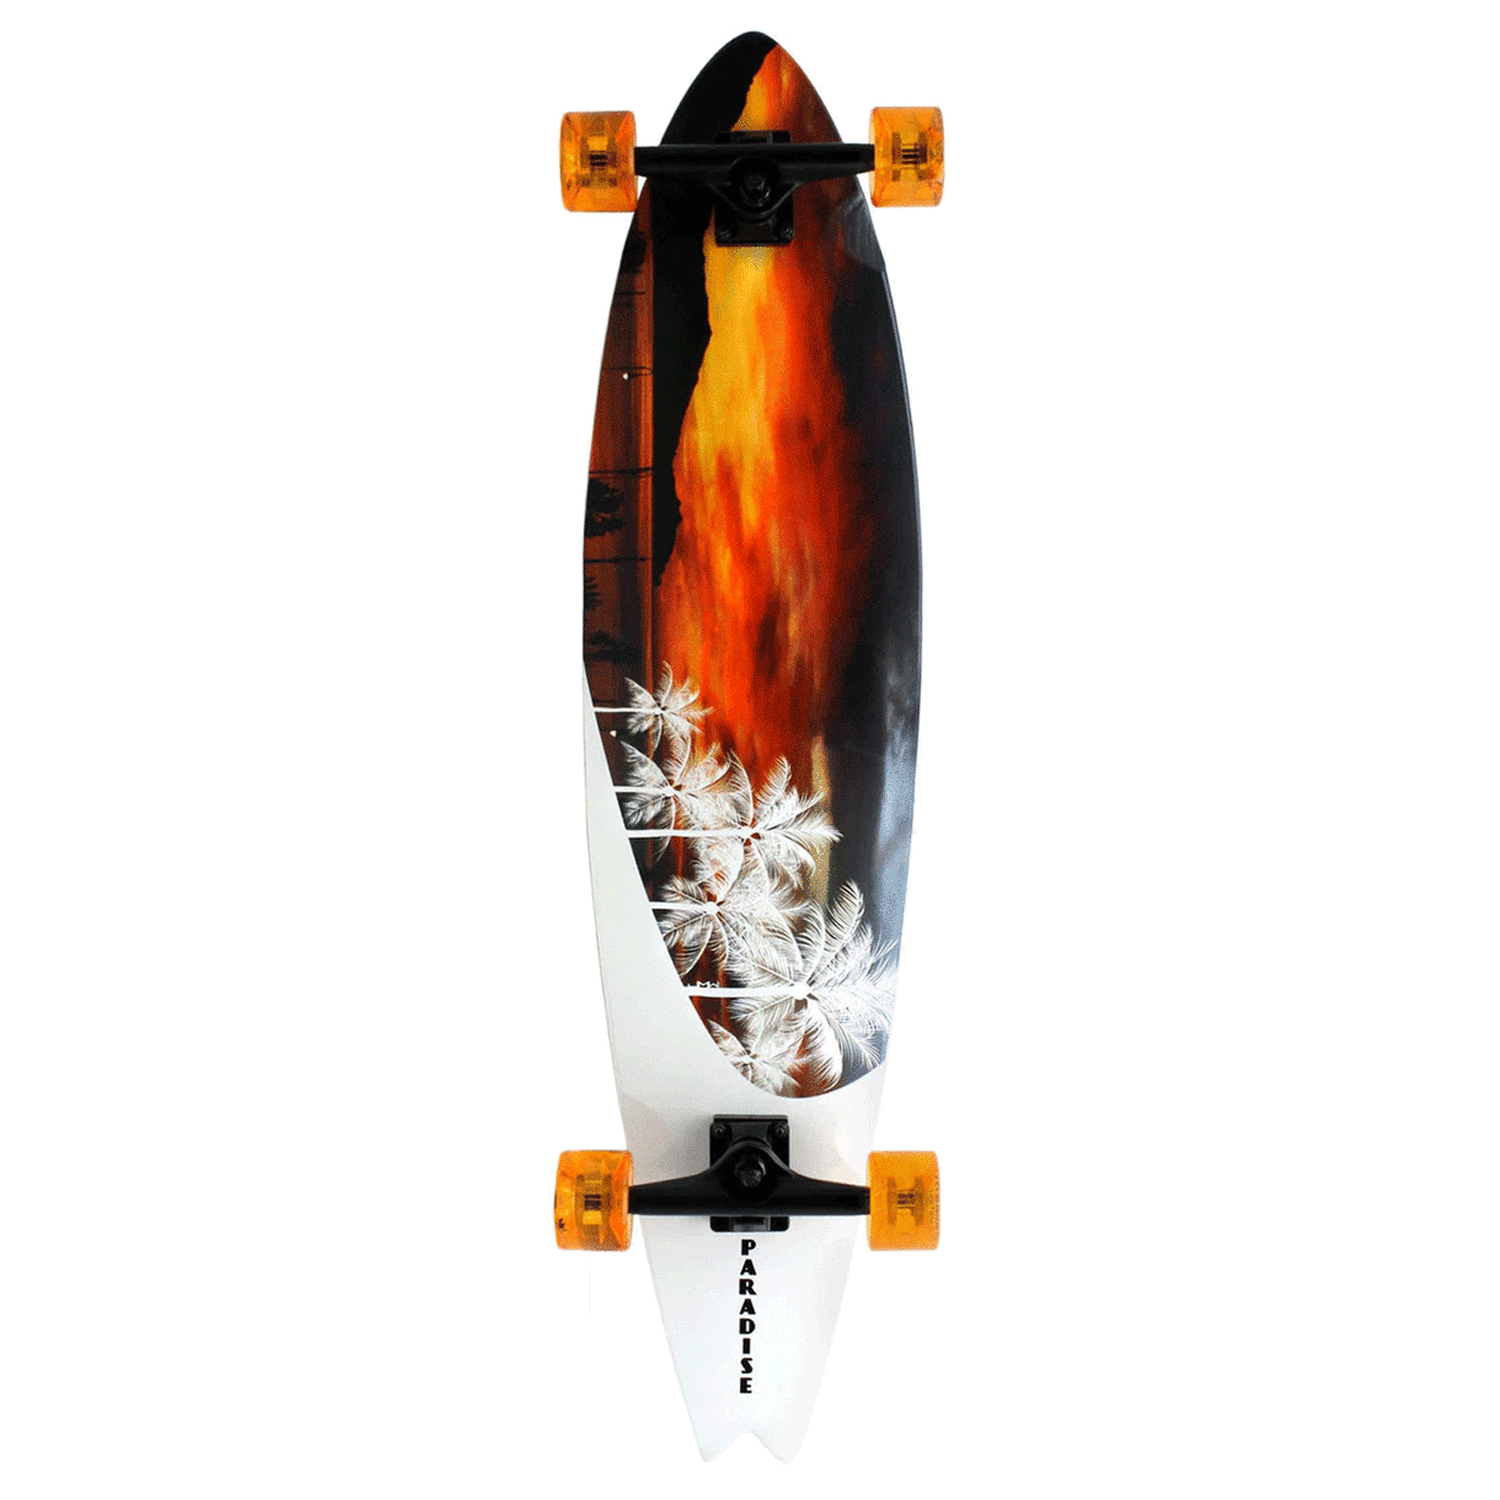 Paradise Longboard White Sunset Complete 9.5 in x 39.5 in